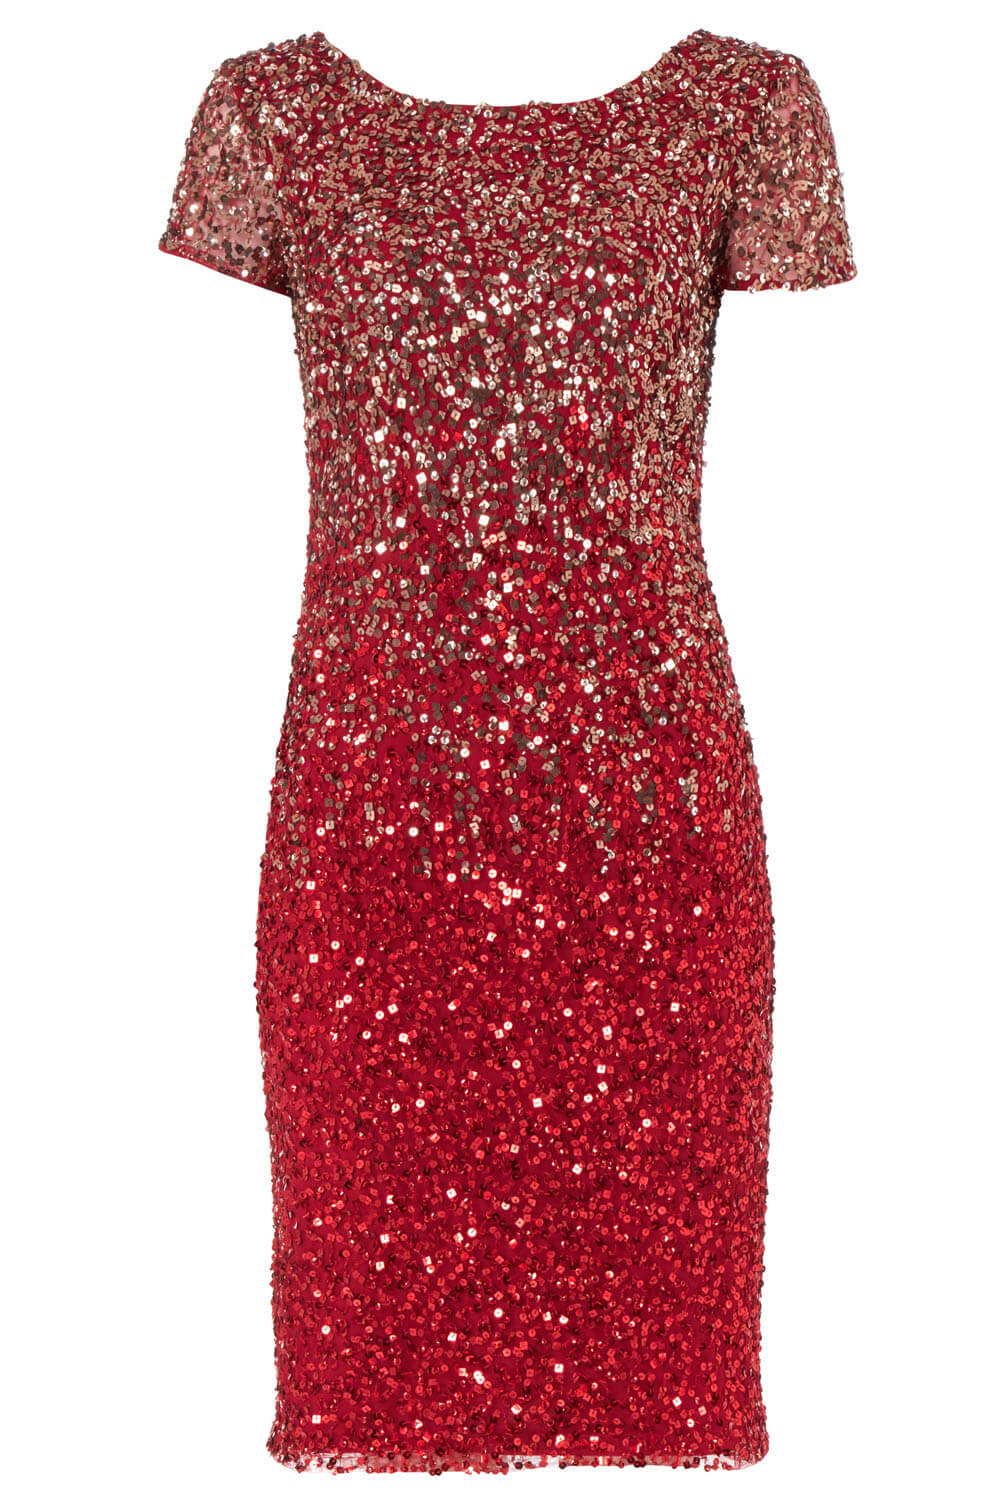 Wine Ombre Sequin Shift Dress, Image 6 of 6